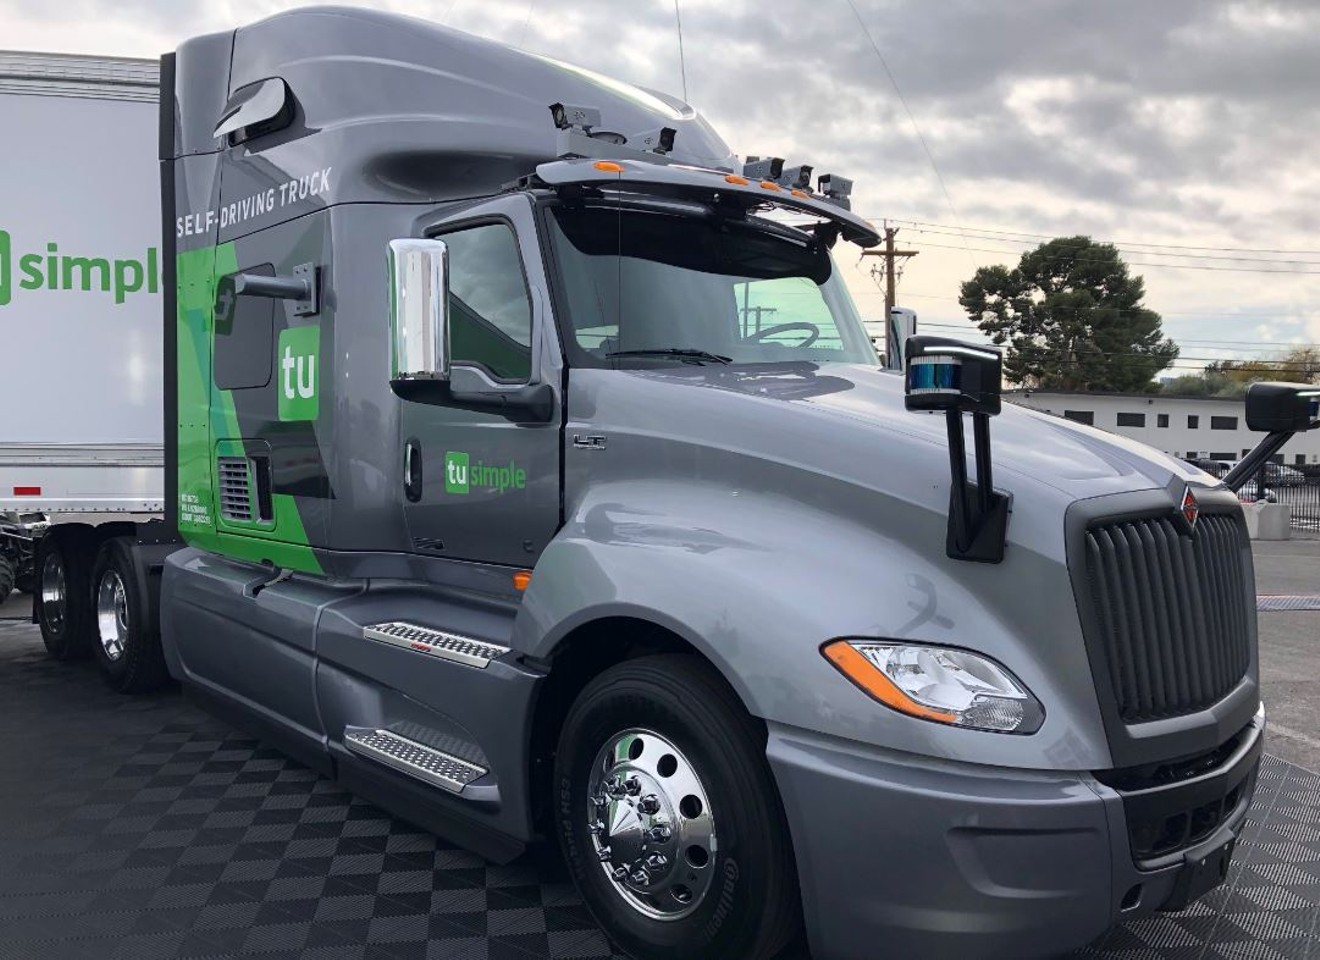 TuSimple, a Chinese autonomous vehicle maker with offices in Tucson, San Diego, and Beijing, announced on Monday it would expand its test program in Arizona to include 40 trucks by June.